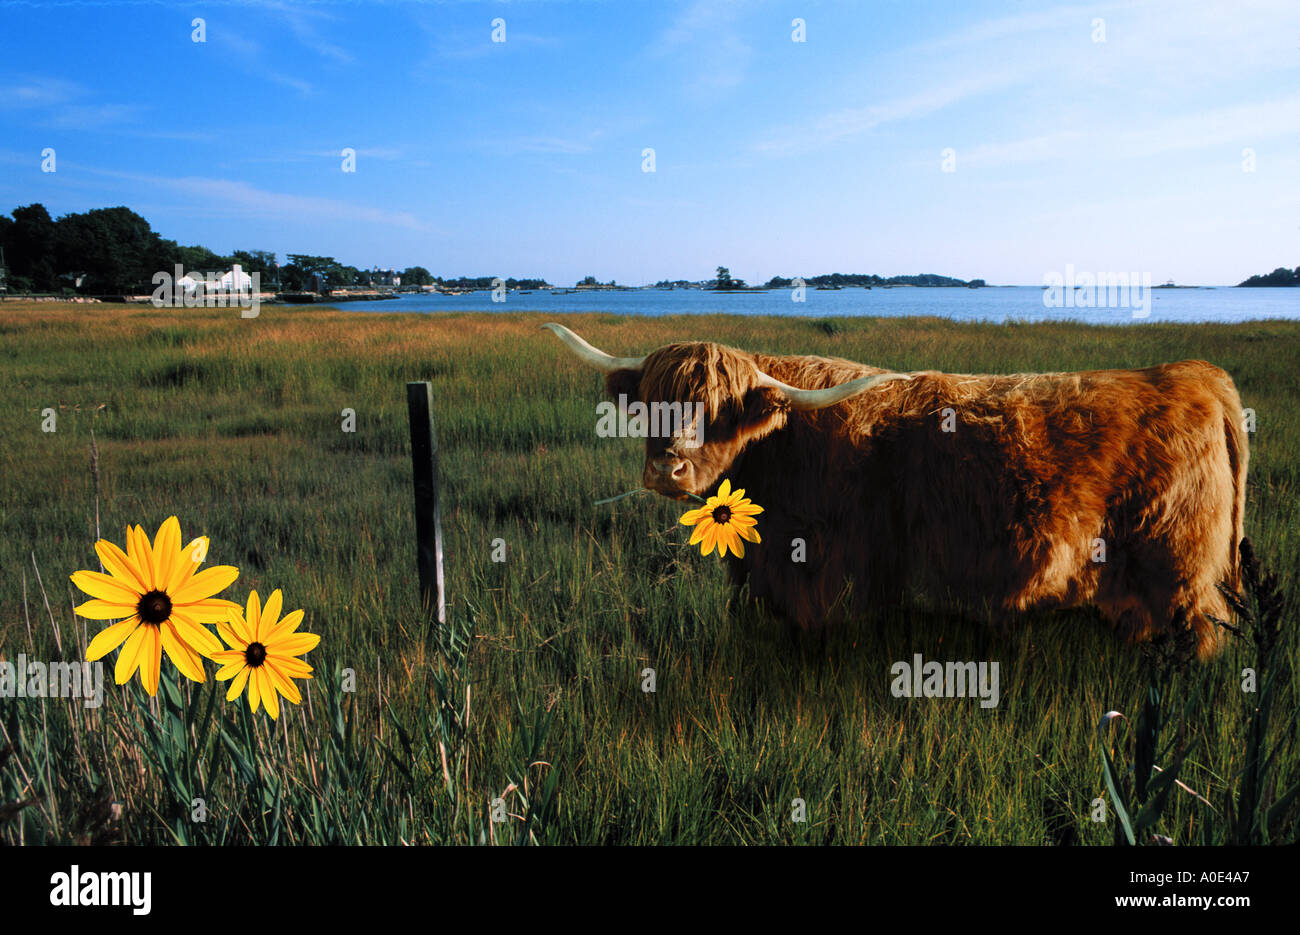 Animal humor A highland cow eating a flower in a marsh animals Stock Photo